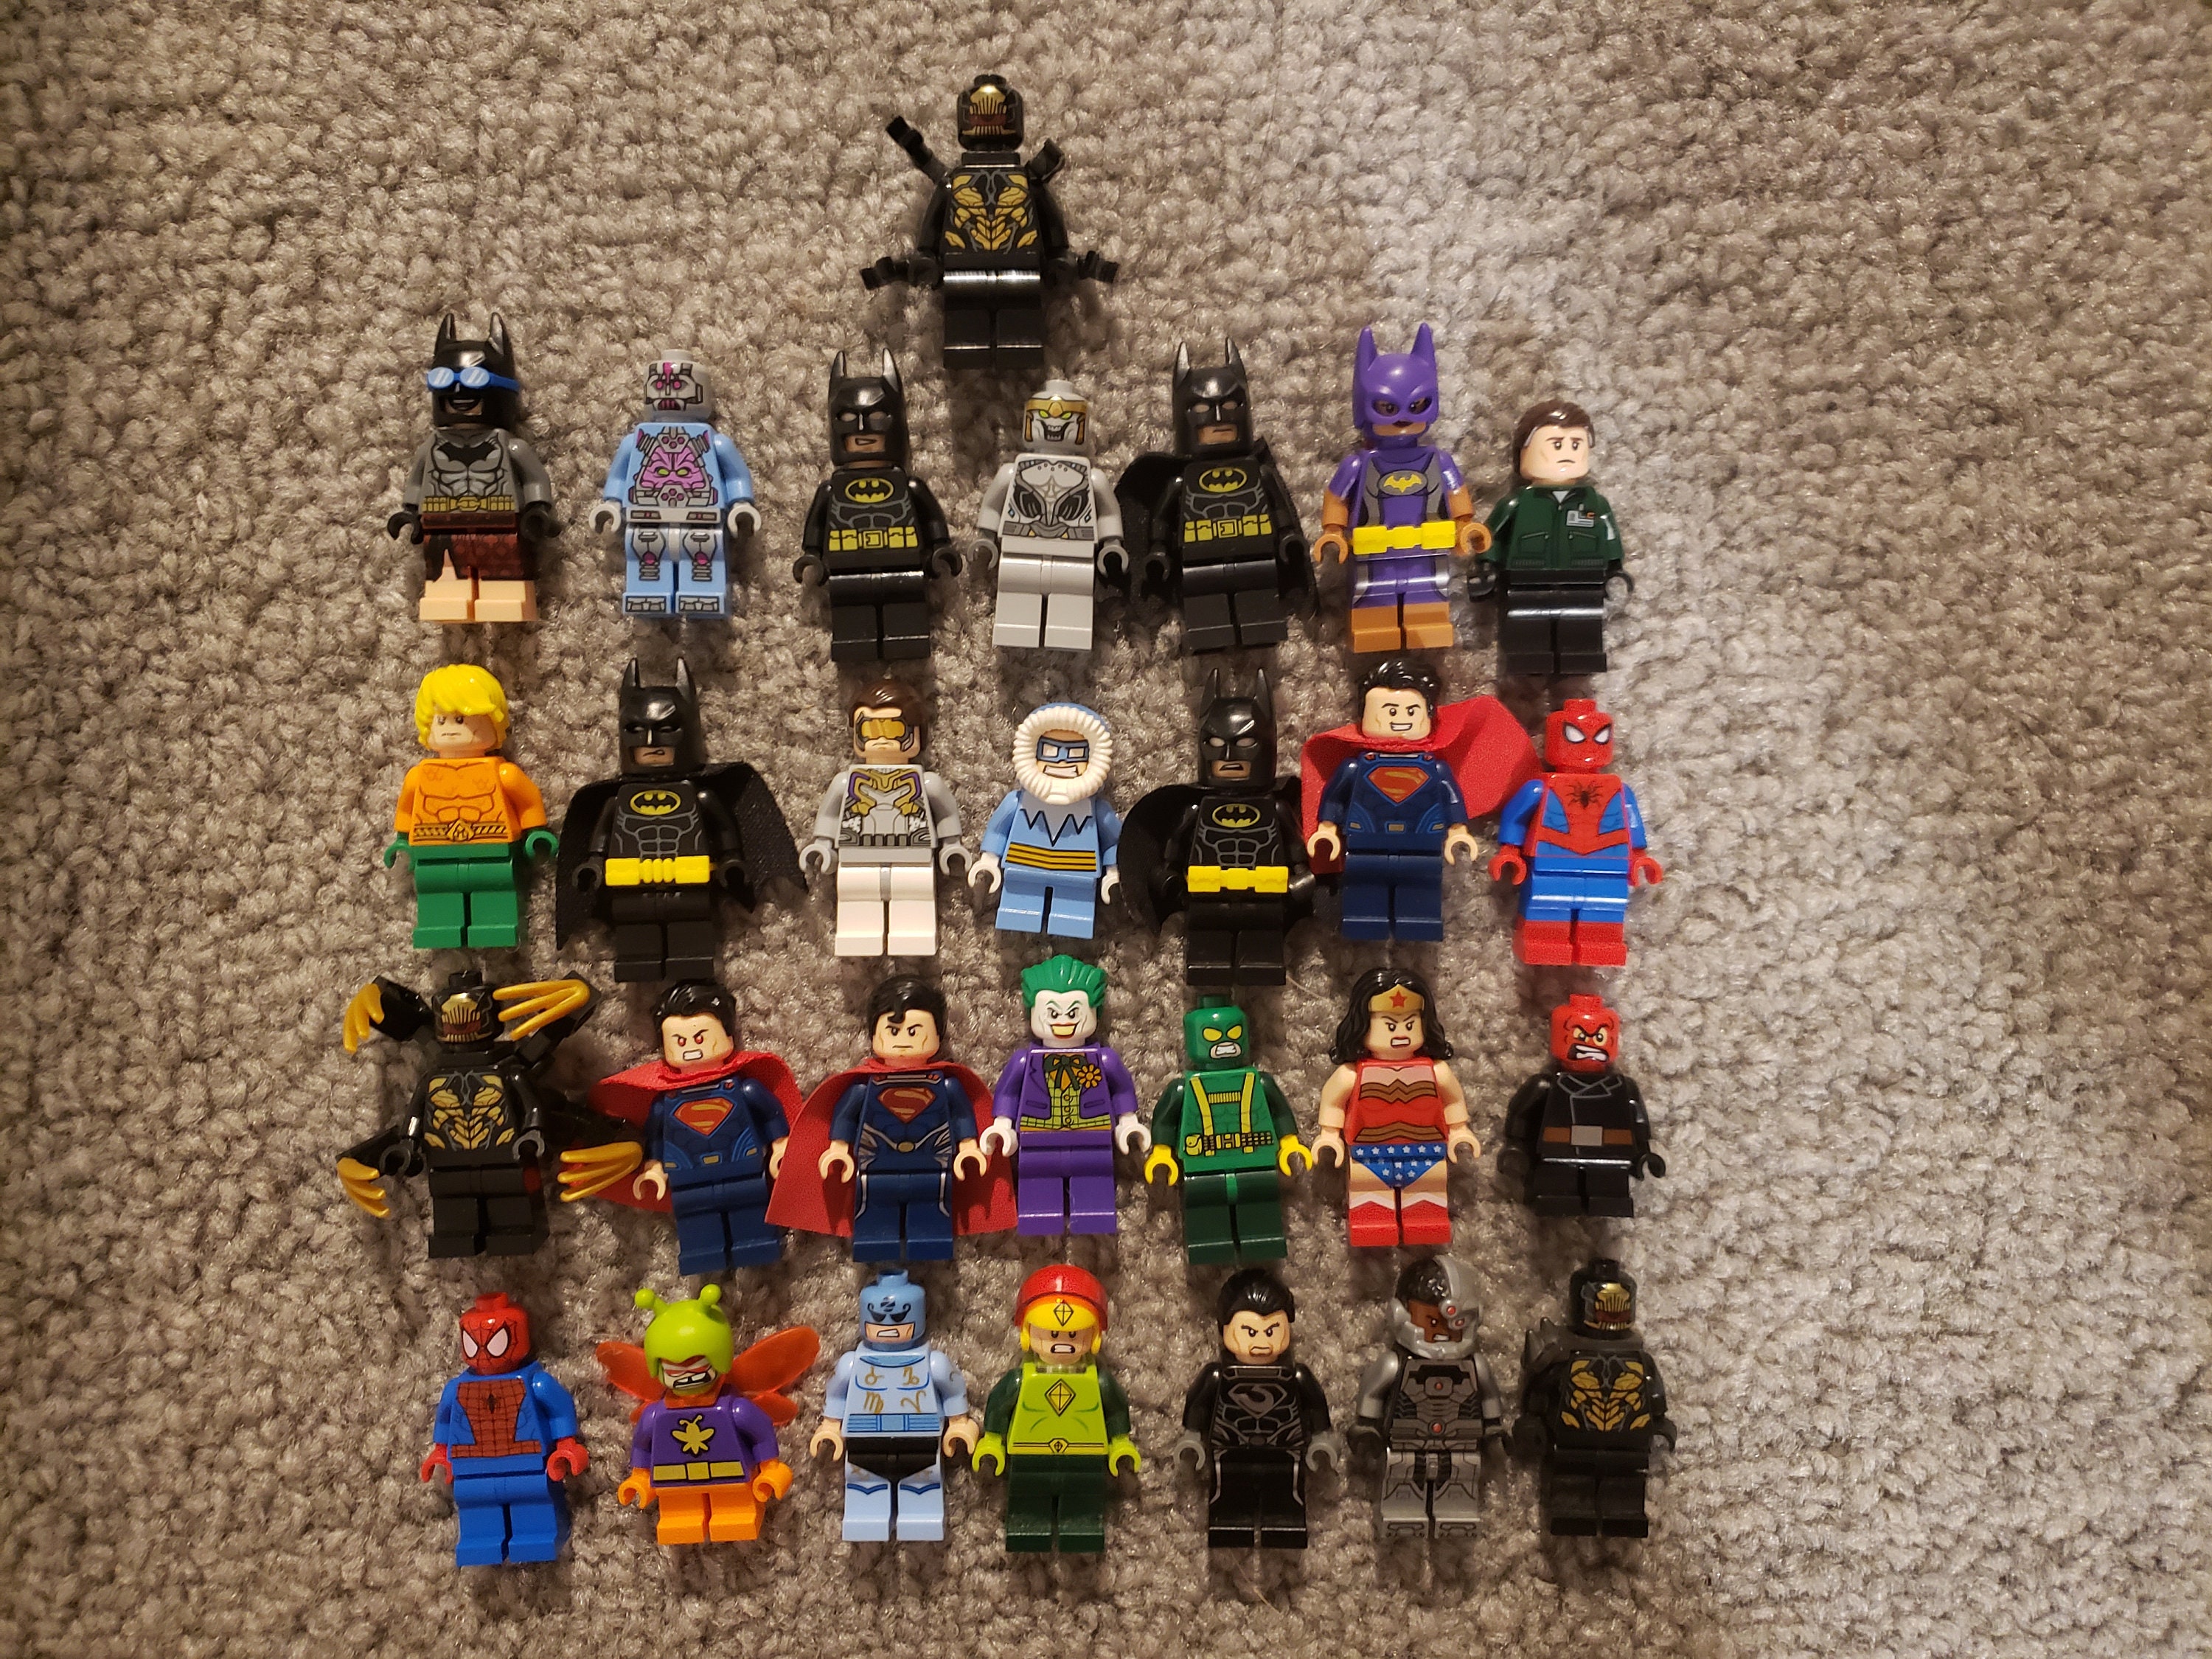 Lego Marvel + DC Super Heroes Minifigures YOU PICK. New 100% Authentic Lego